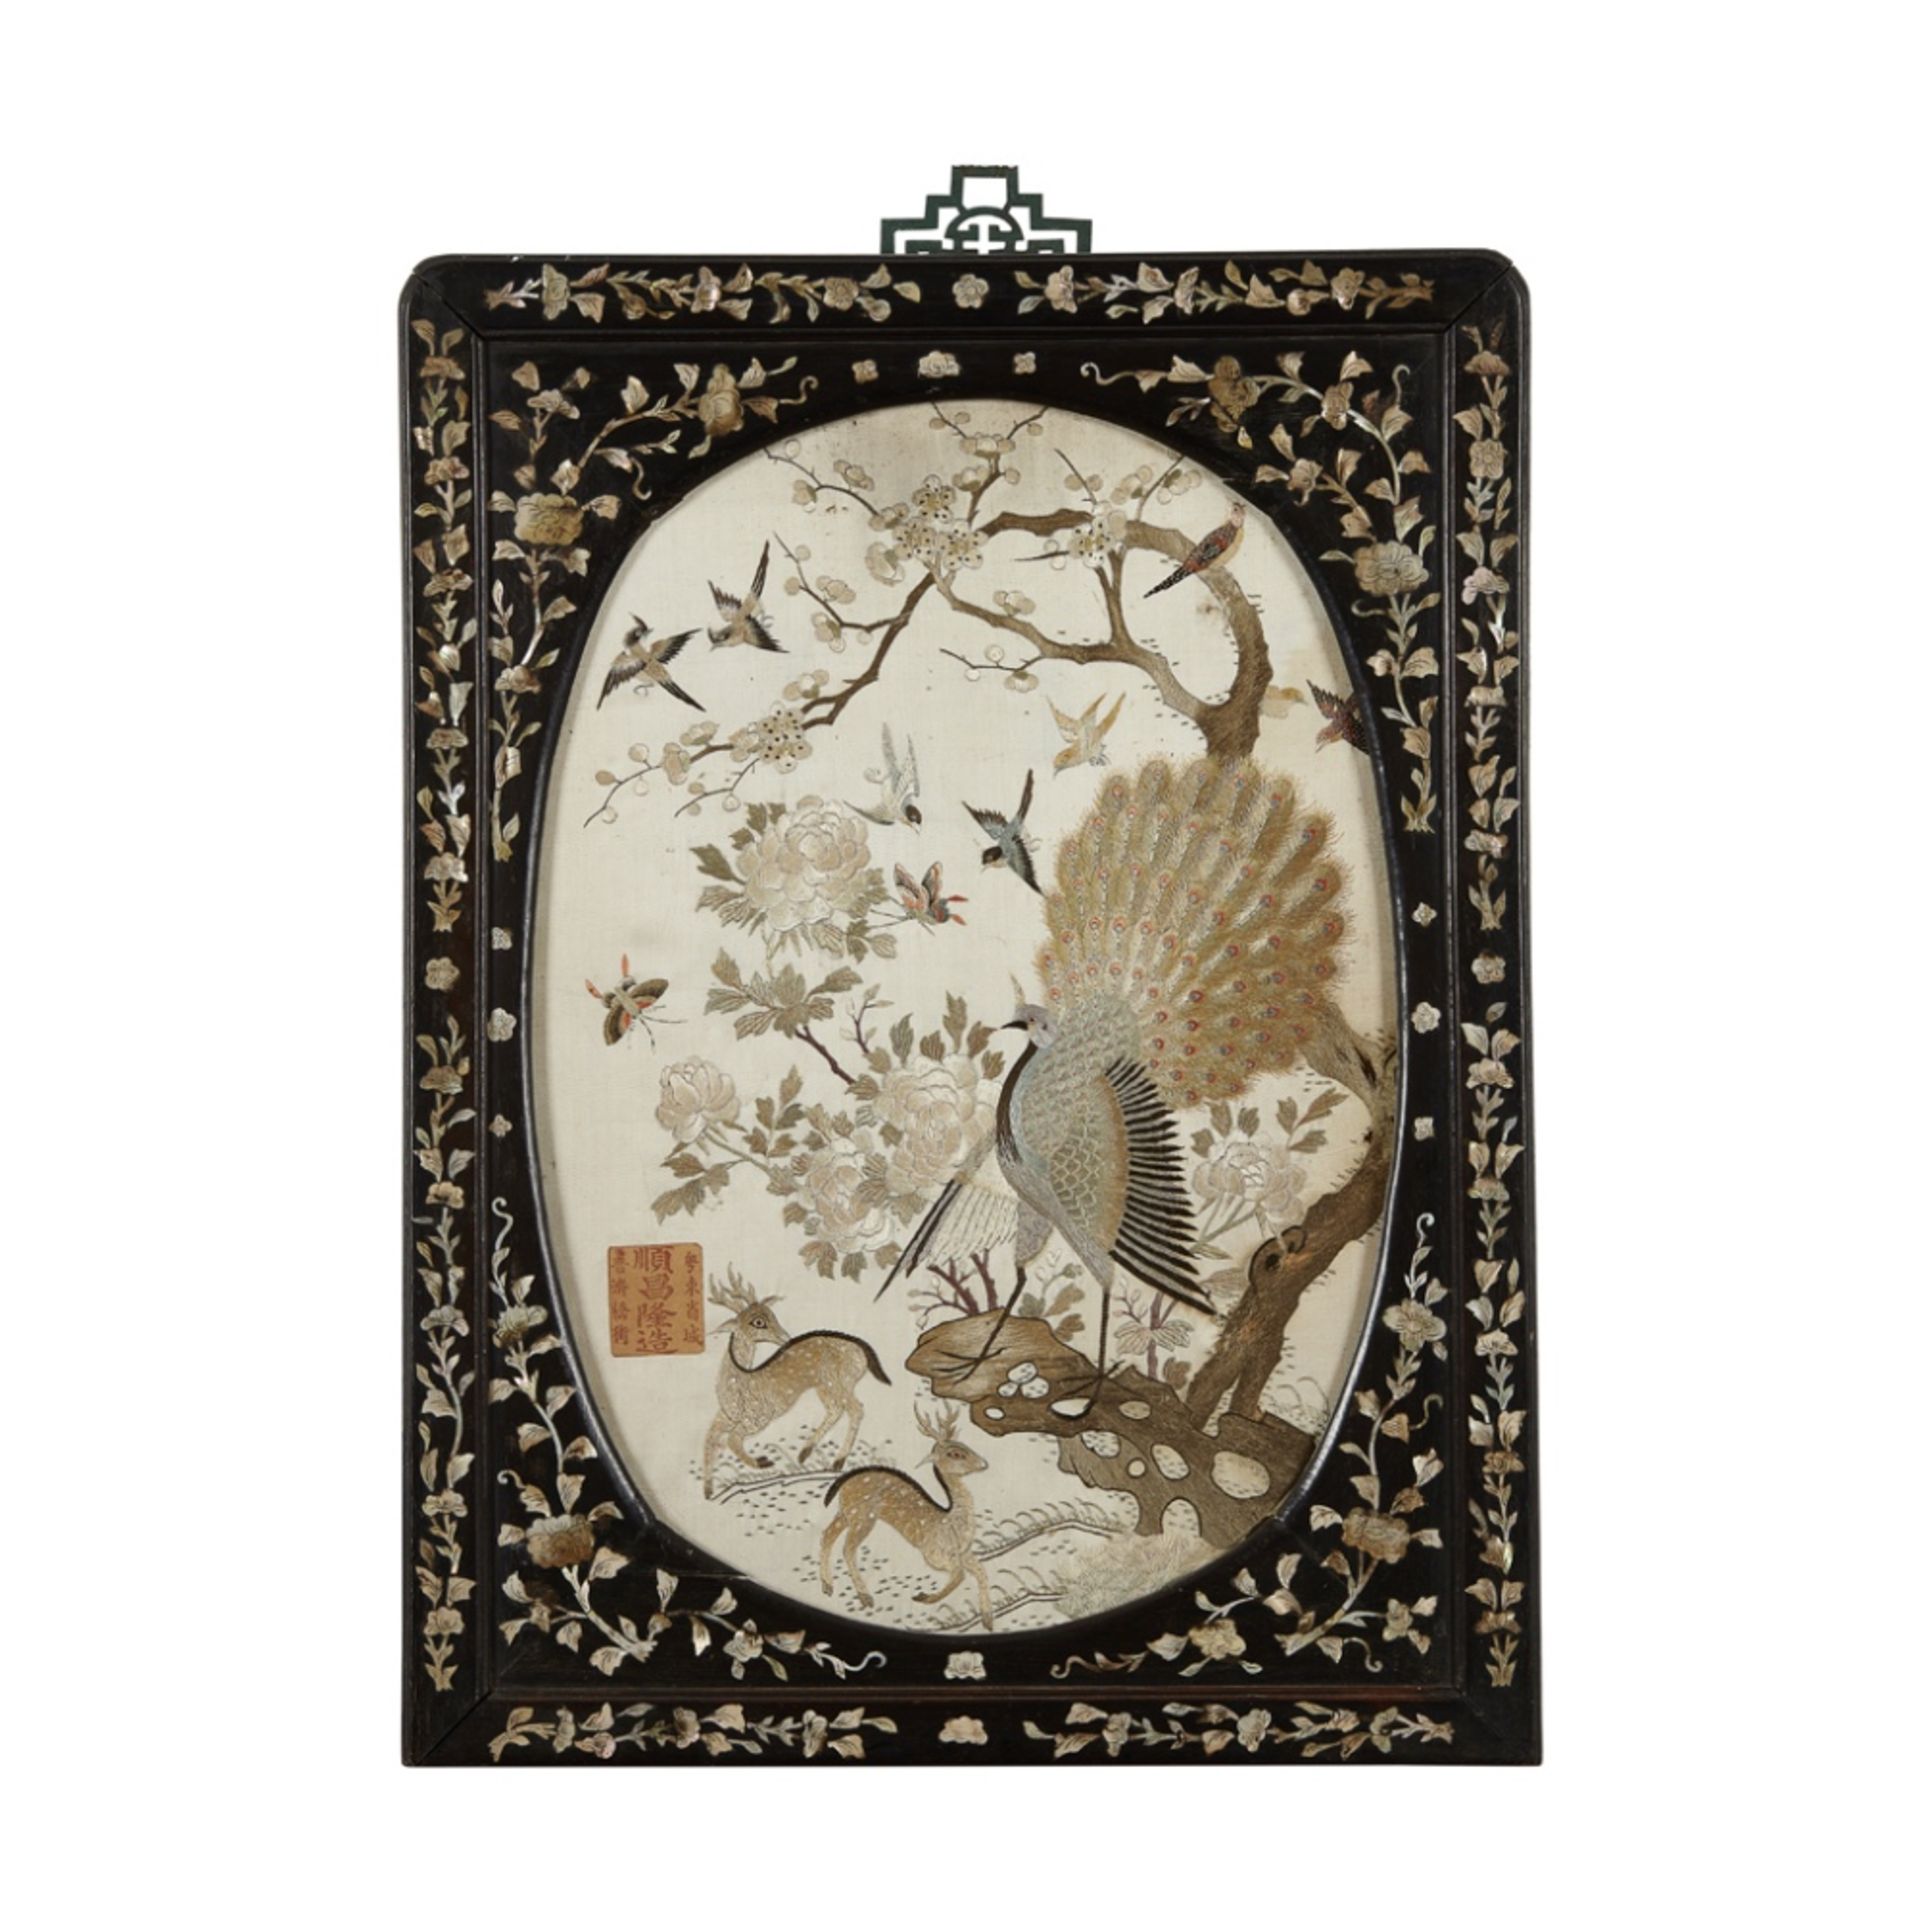 EMBROIDERED SILK 'BIRDS AND DEER' HANGING PANELSHUN CHANG LONG MARK, LATE QING DYNASTY the ivory